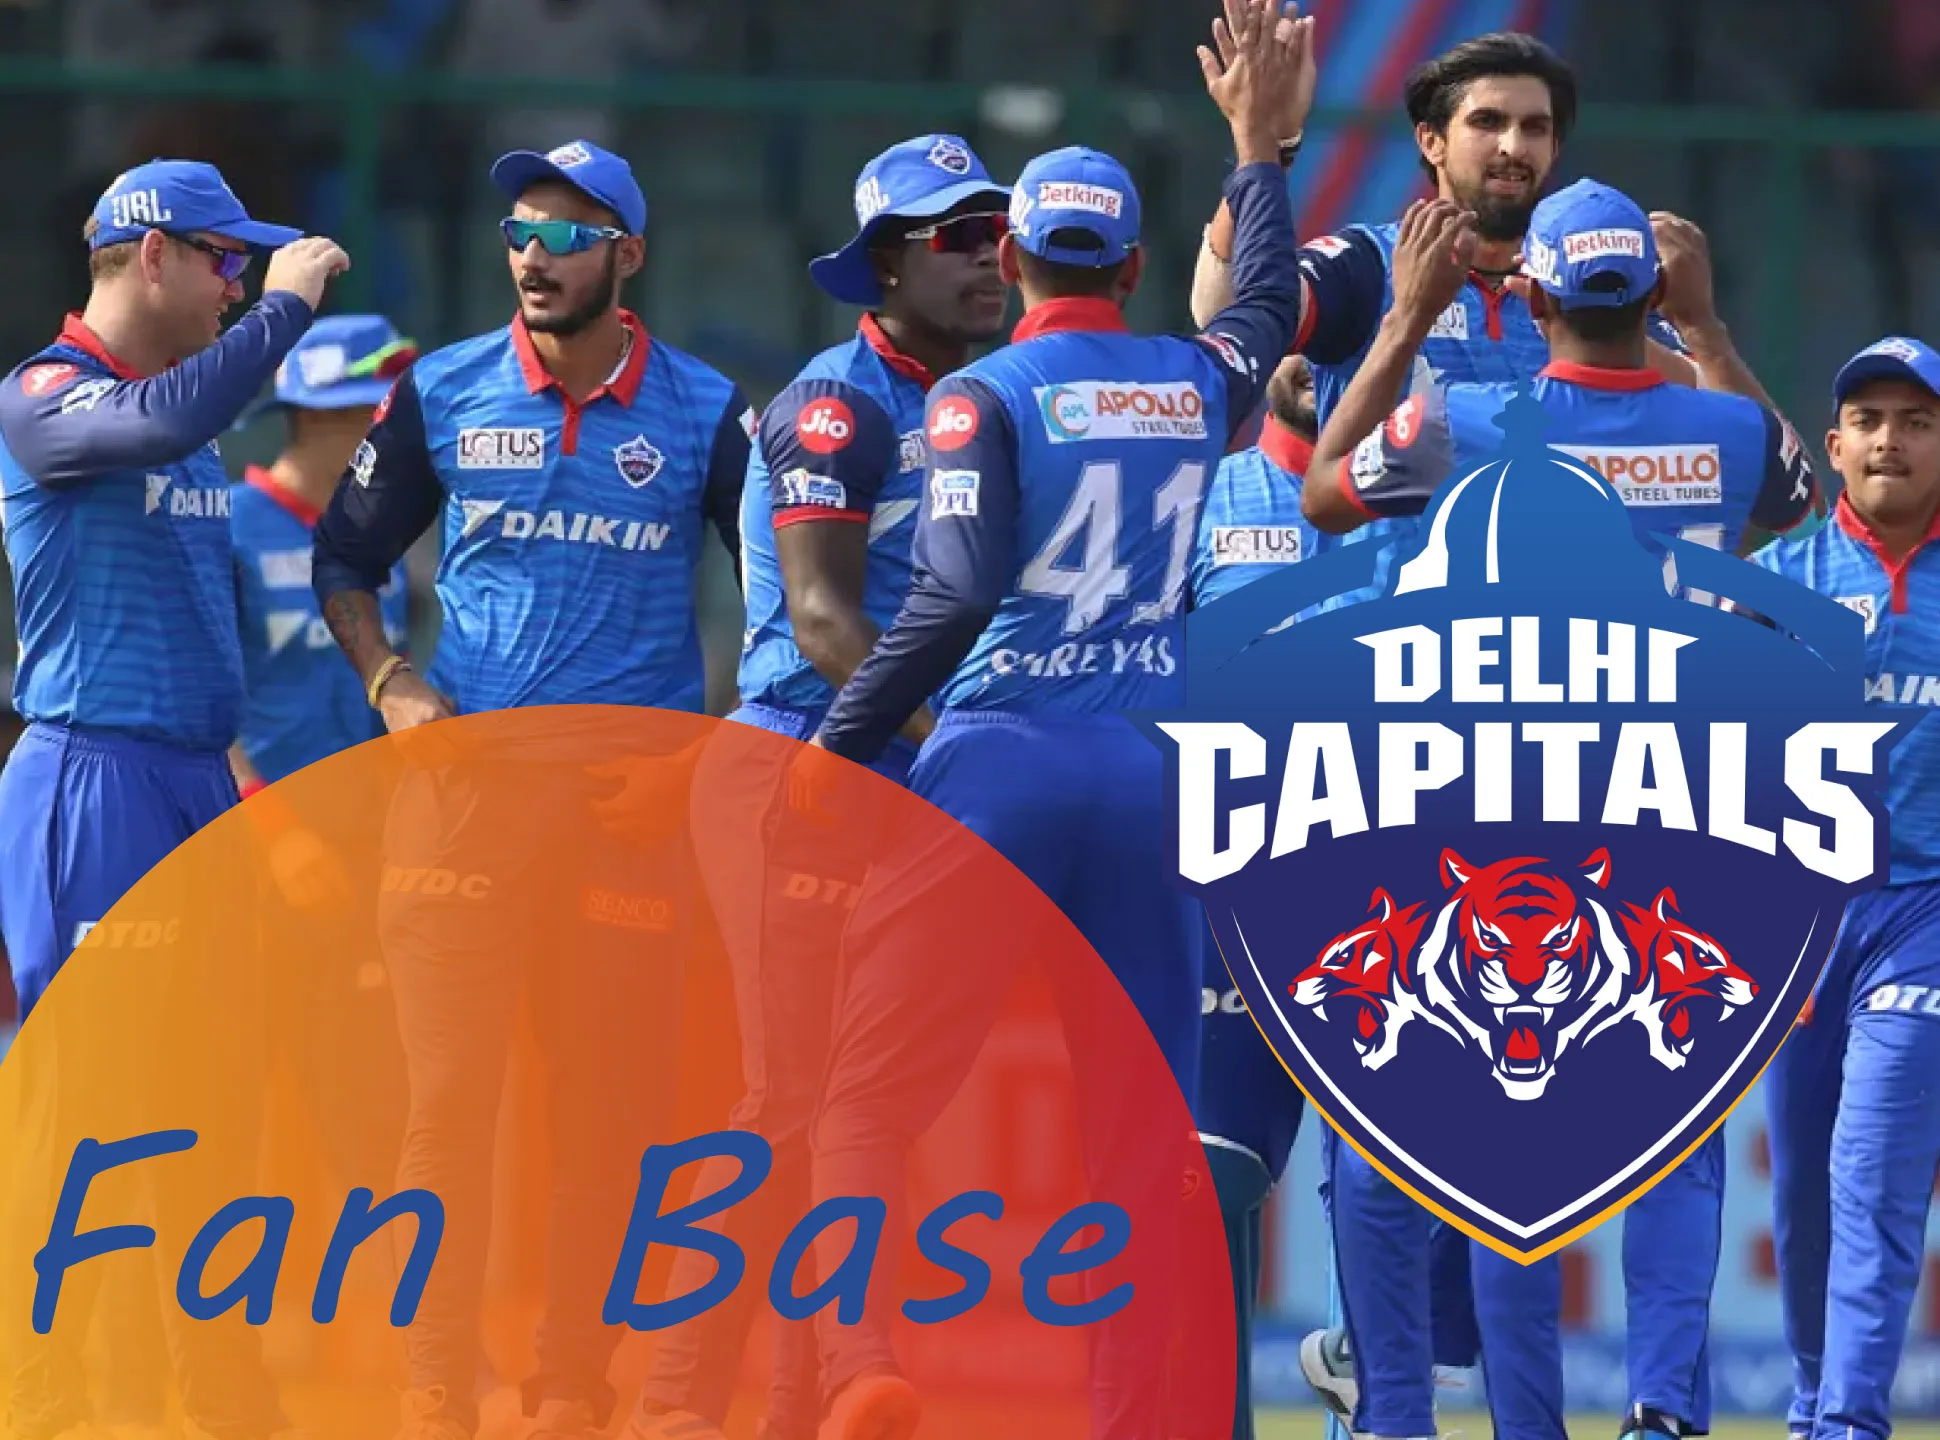 The fans of Delhi Capitals hope that the team will be in finals again.